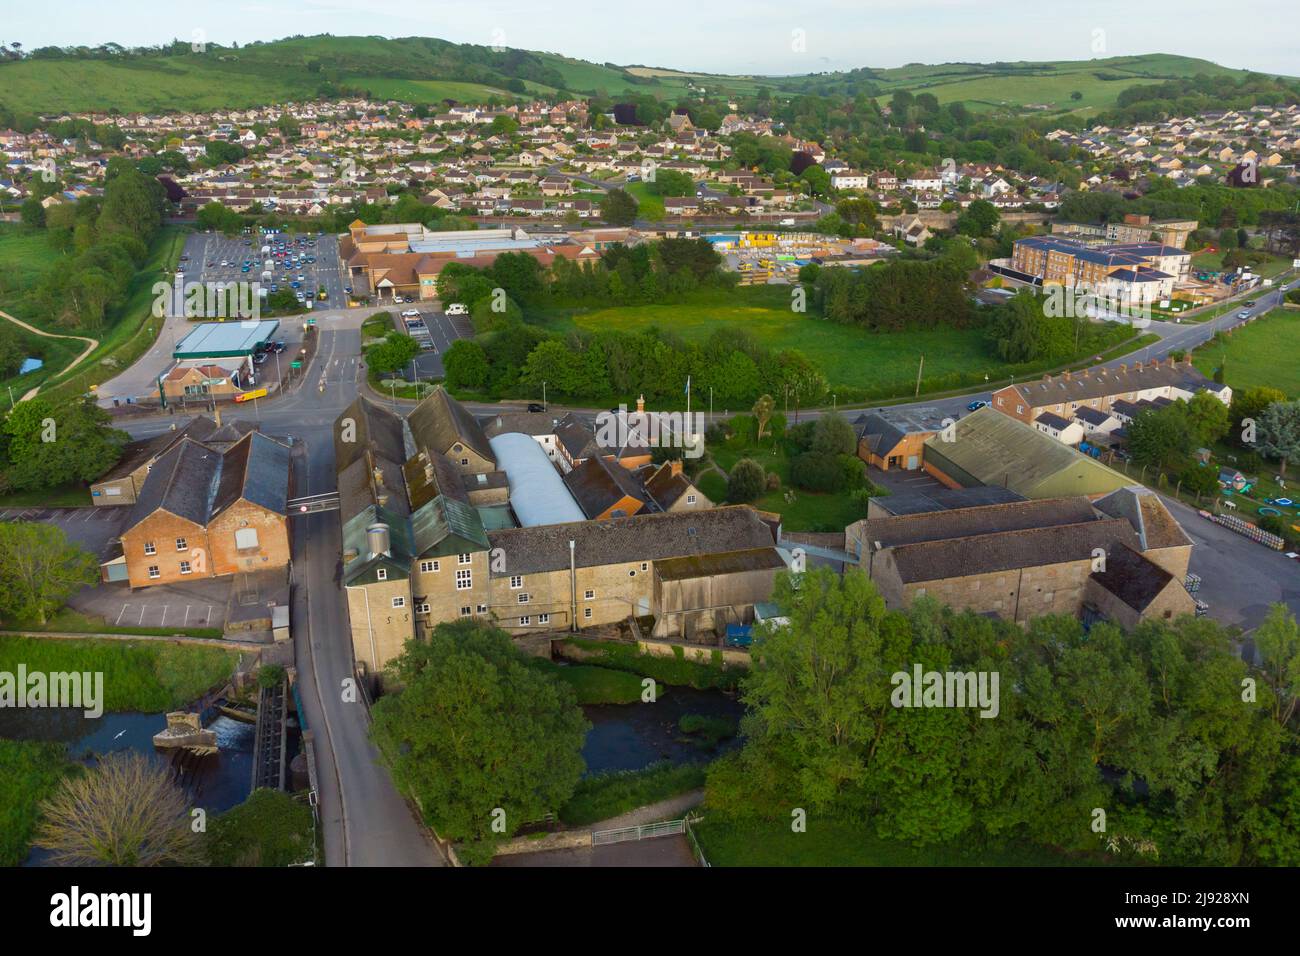 General view from the air of the historic JC & RH Palmers Ltd The Old Brewery which sits next to the river Brit at Bridport in Dorset.  The brewery wa Stock Photo